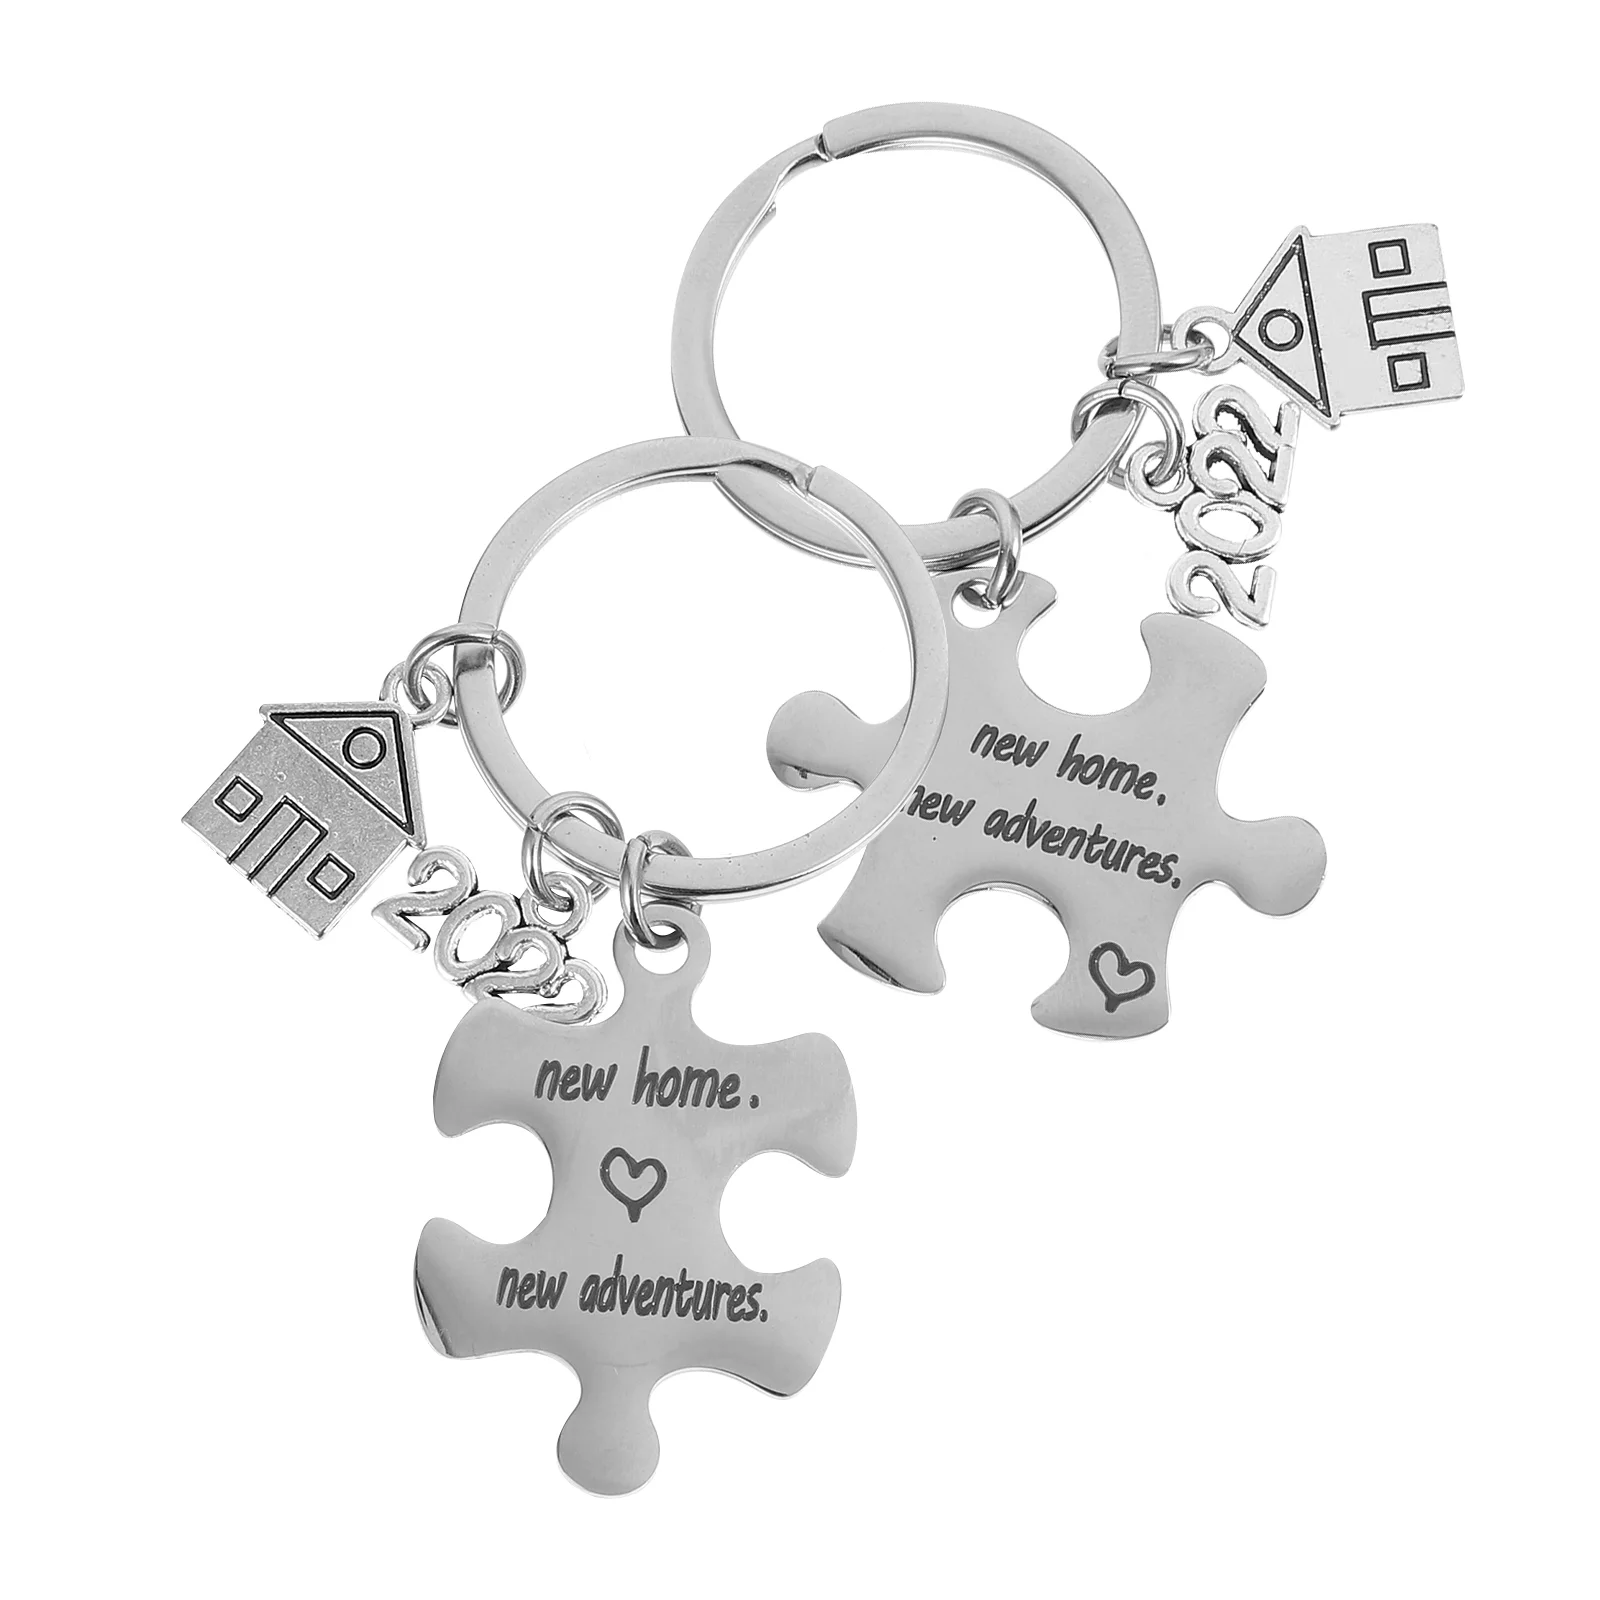 

New Home Keychain Gift Gifts Key Housewarming House Keyring First Ring Homeowner Couples Keyringsneighbor Warming Puzzle Couple